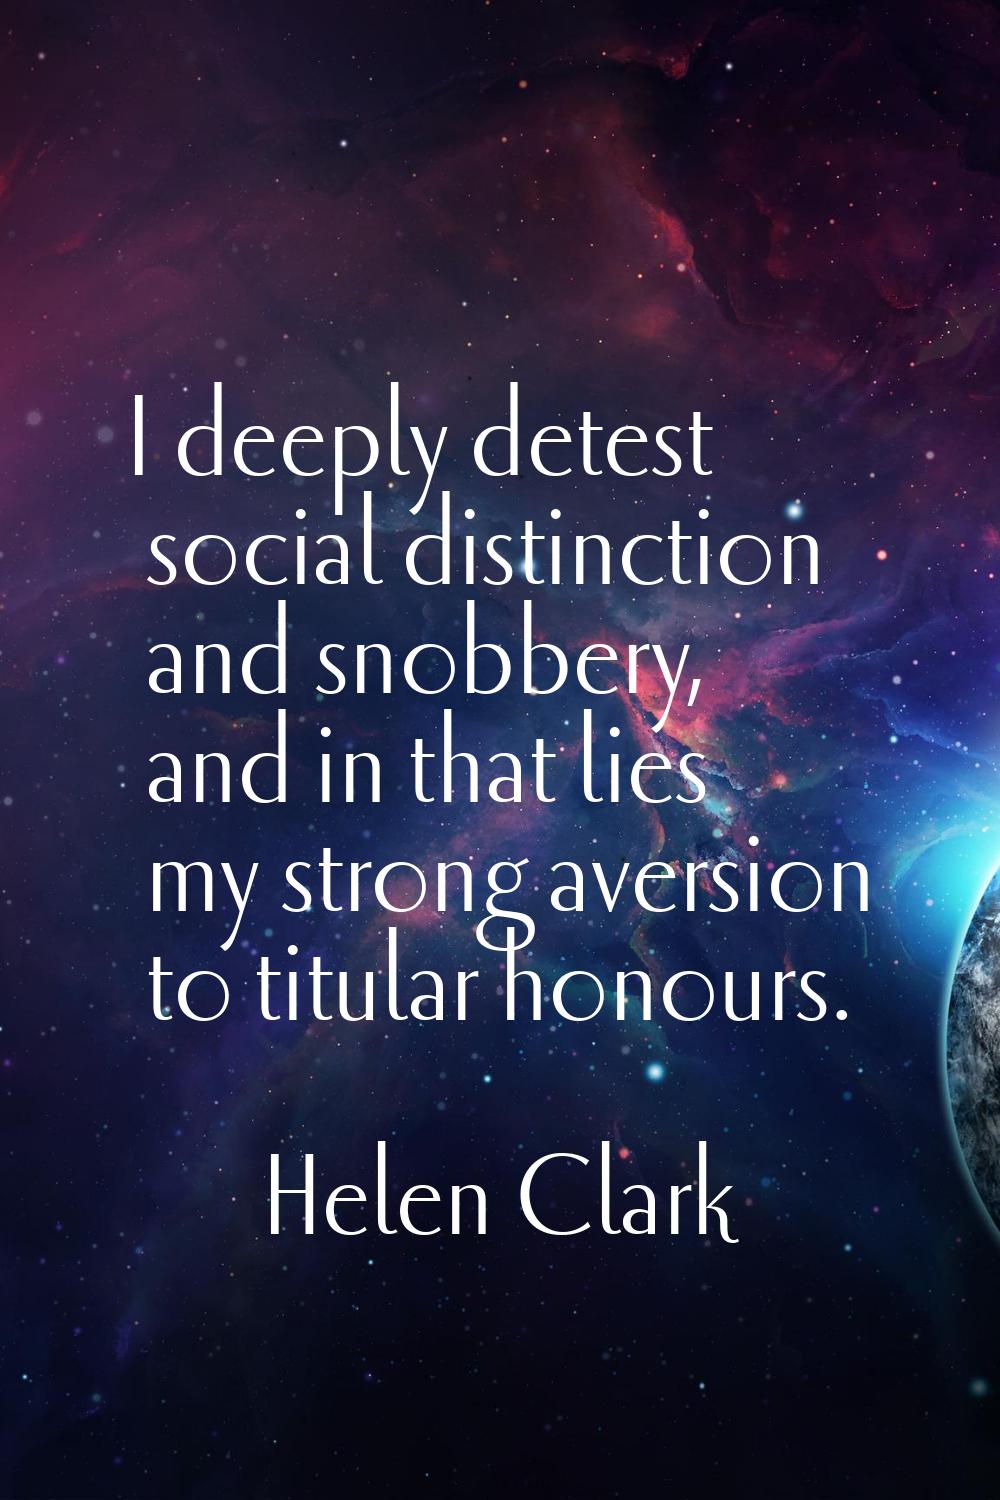 I deeply detest social distinction and snobbery, and in that lies my strong aversion to titular hon